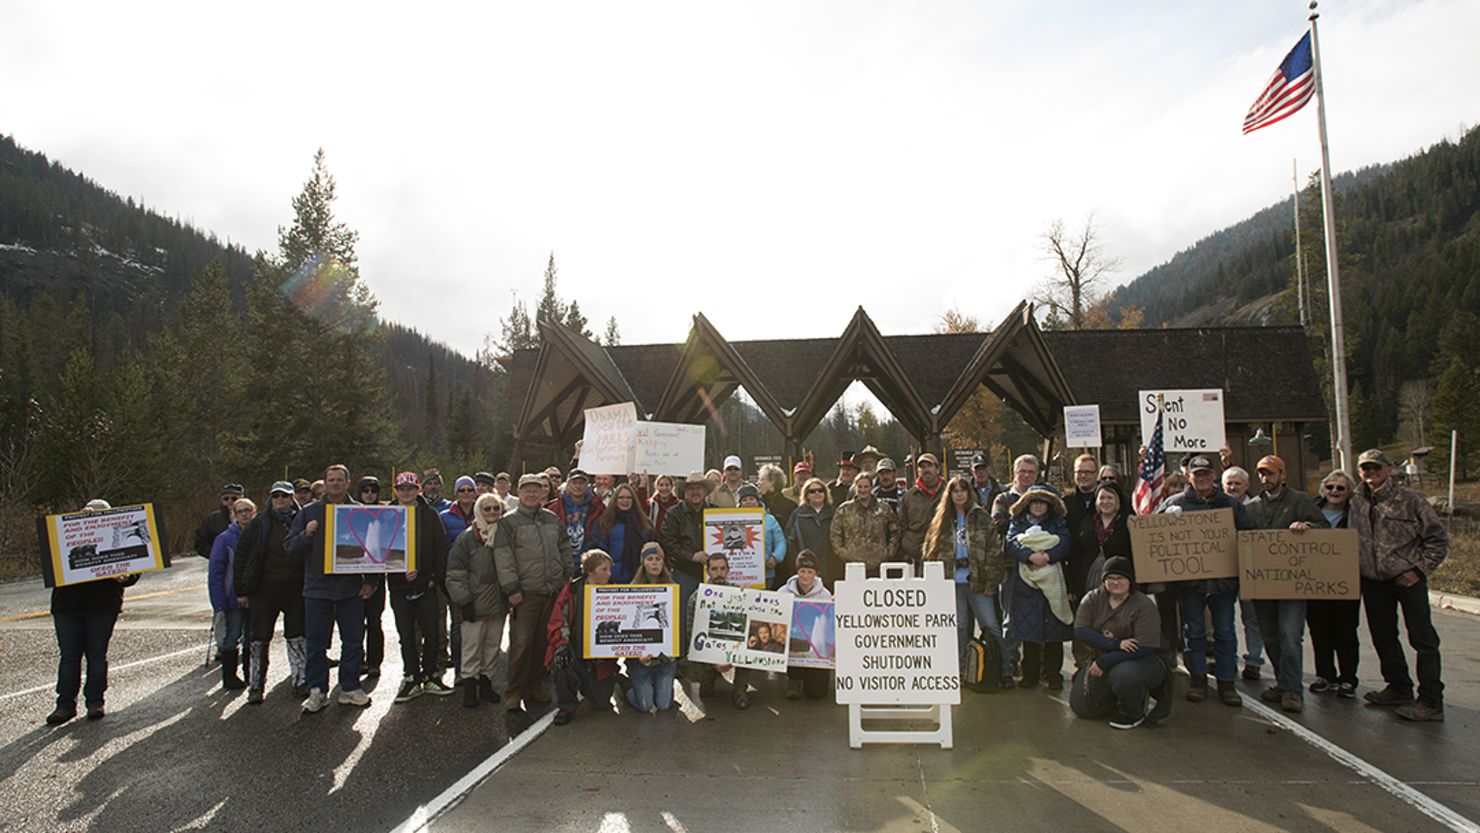 Yellowstone and other national parks have reopened, but some Americans missed them so much that they staged protests at the gates.